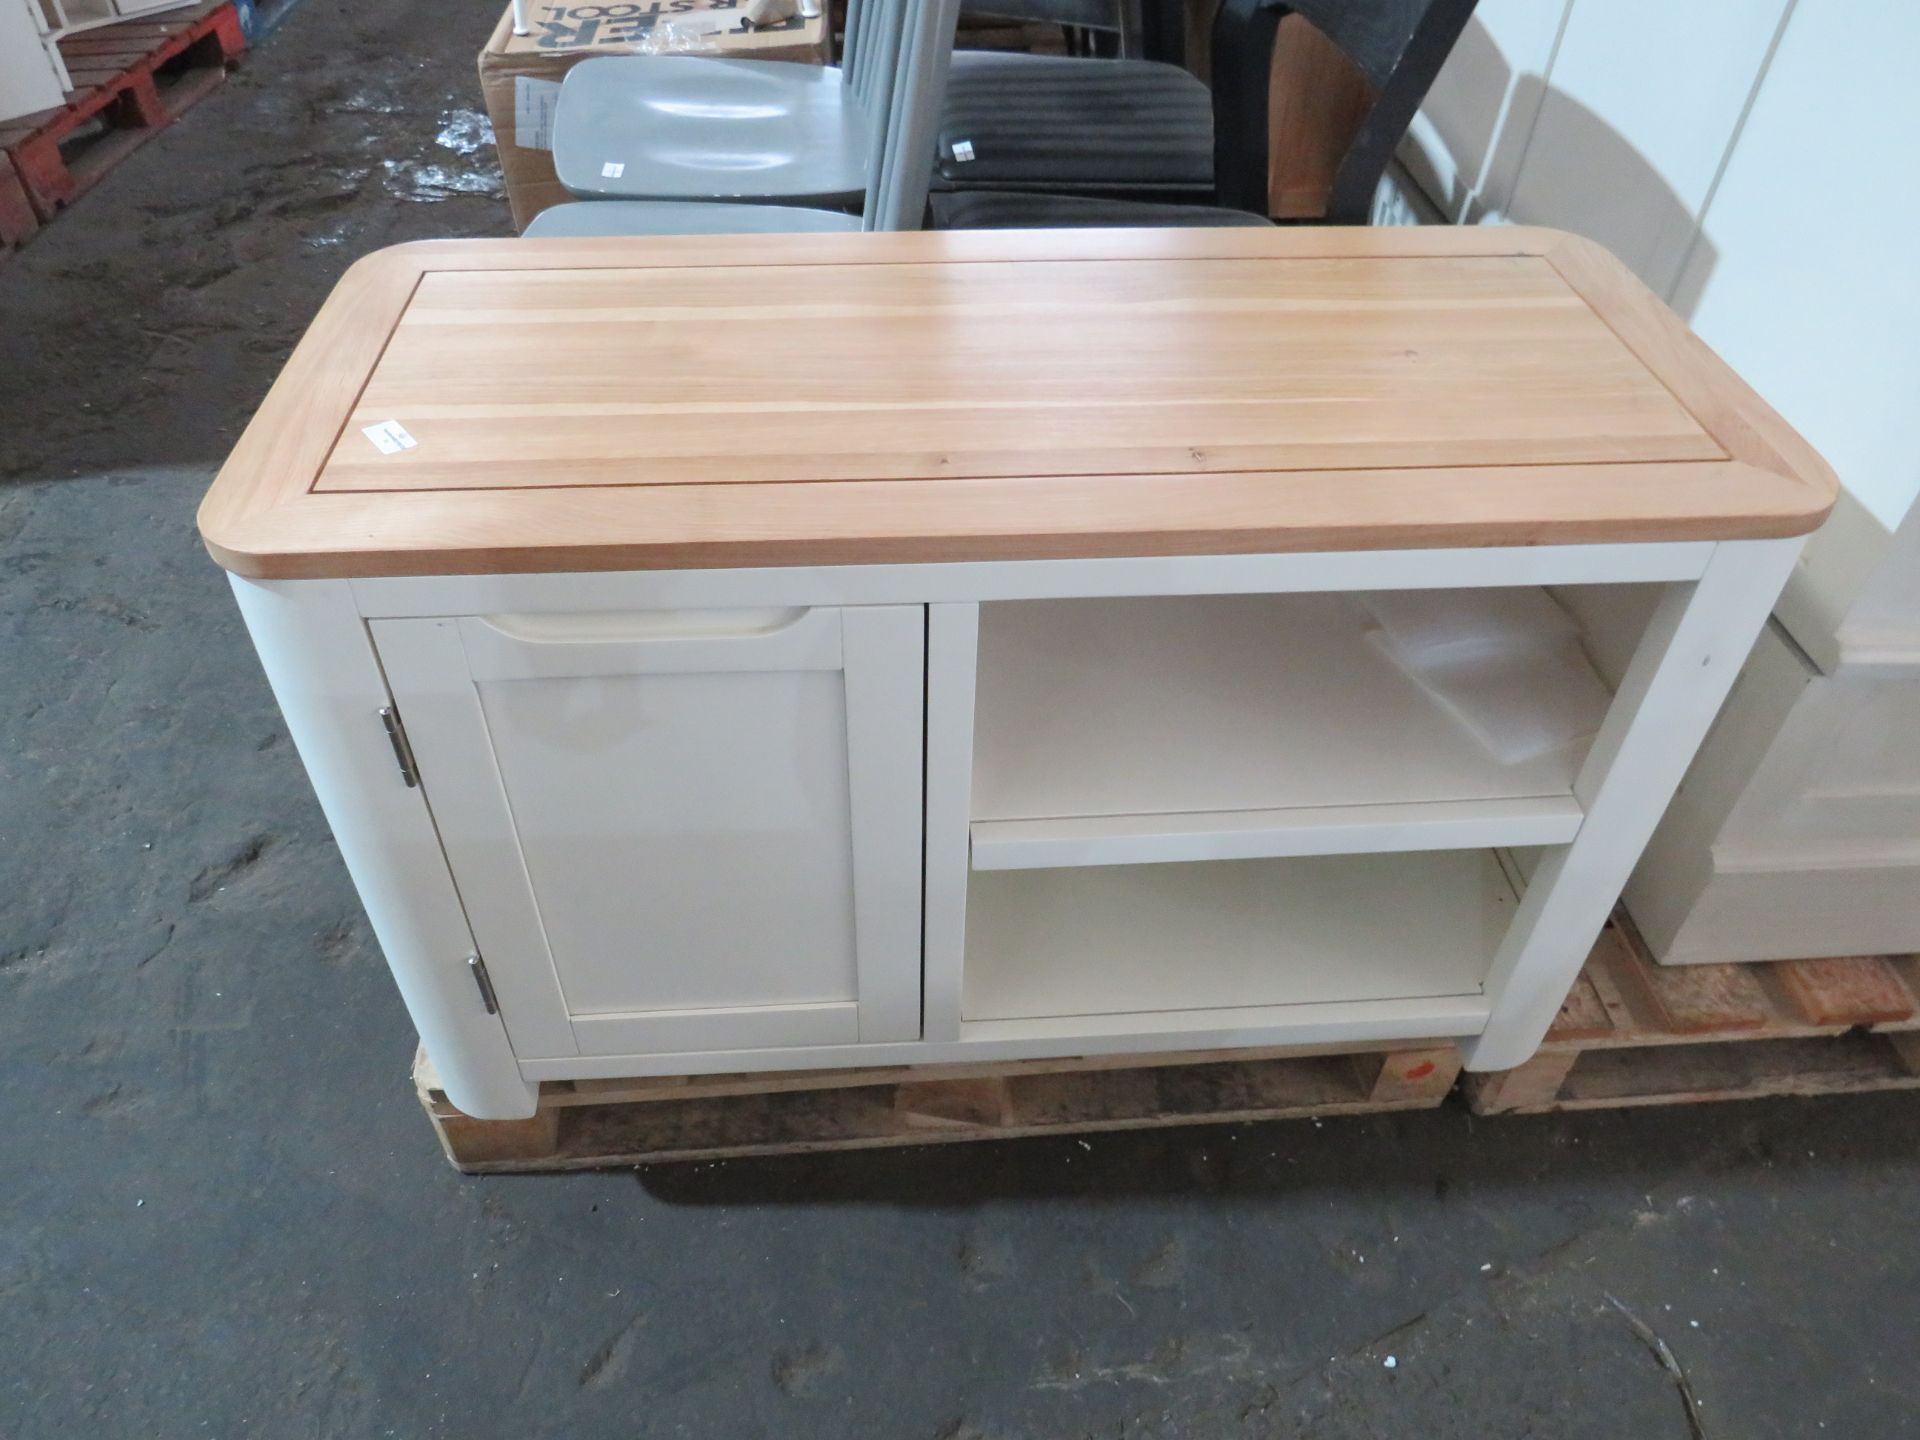 Oak Furnitureland Hove Natural Oak And Painted Small Tv Unit RRP 299.99 You can still have solid,